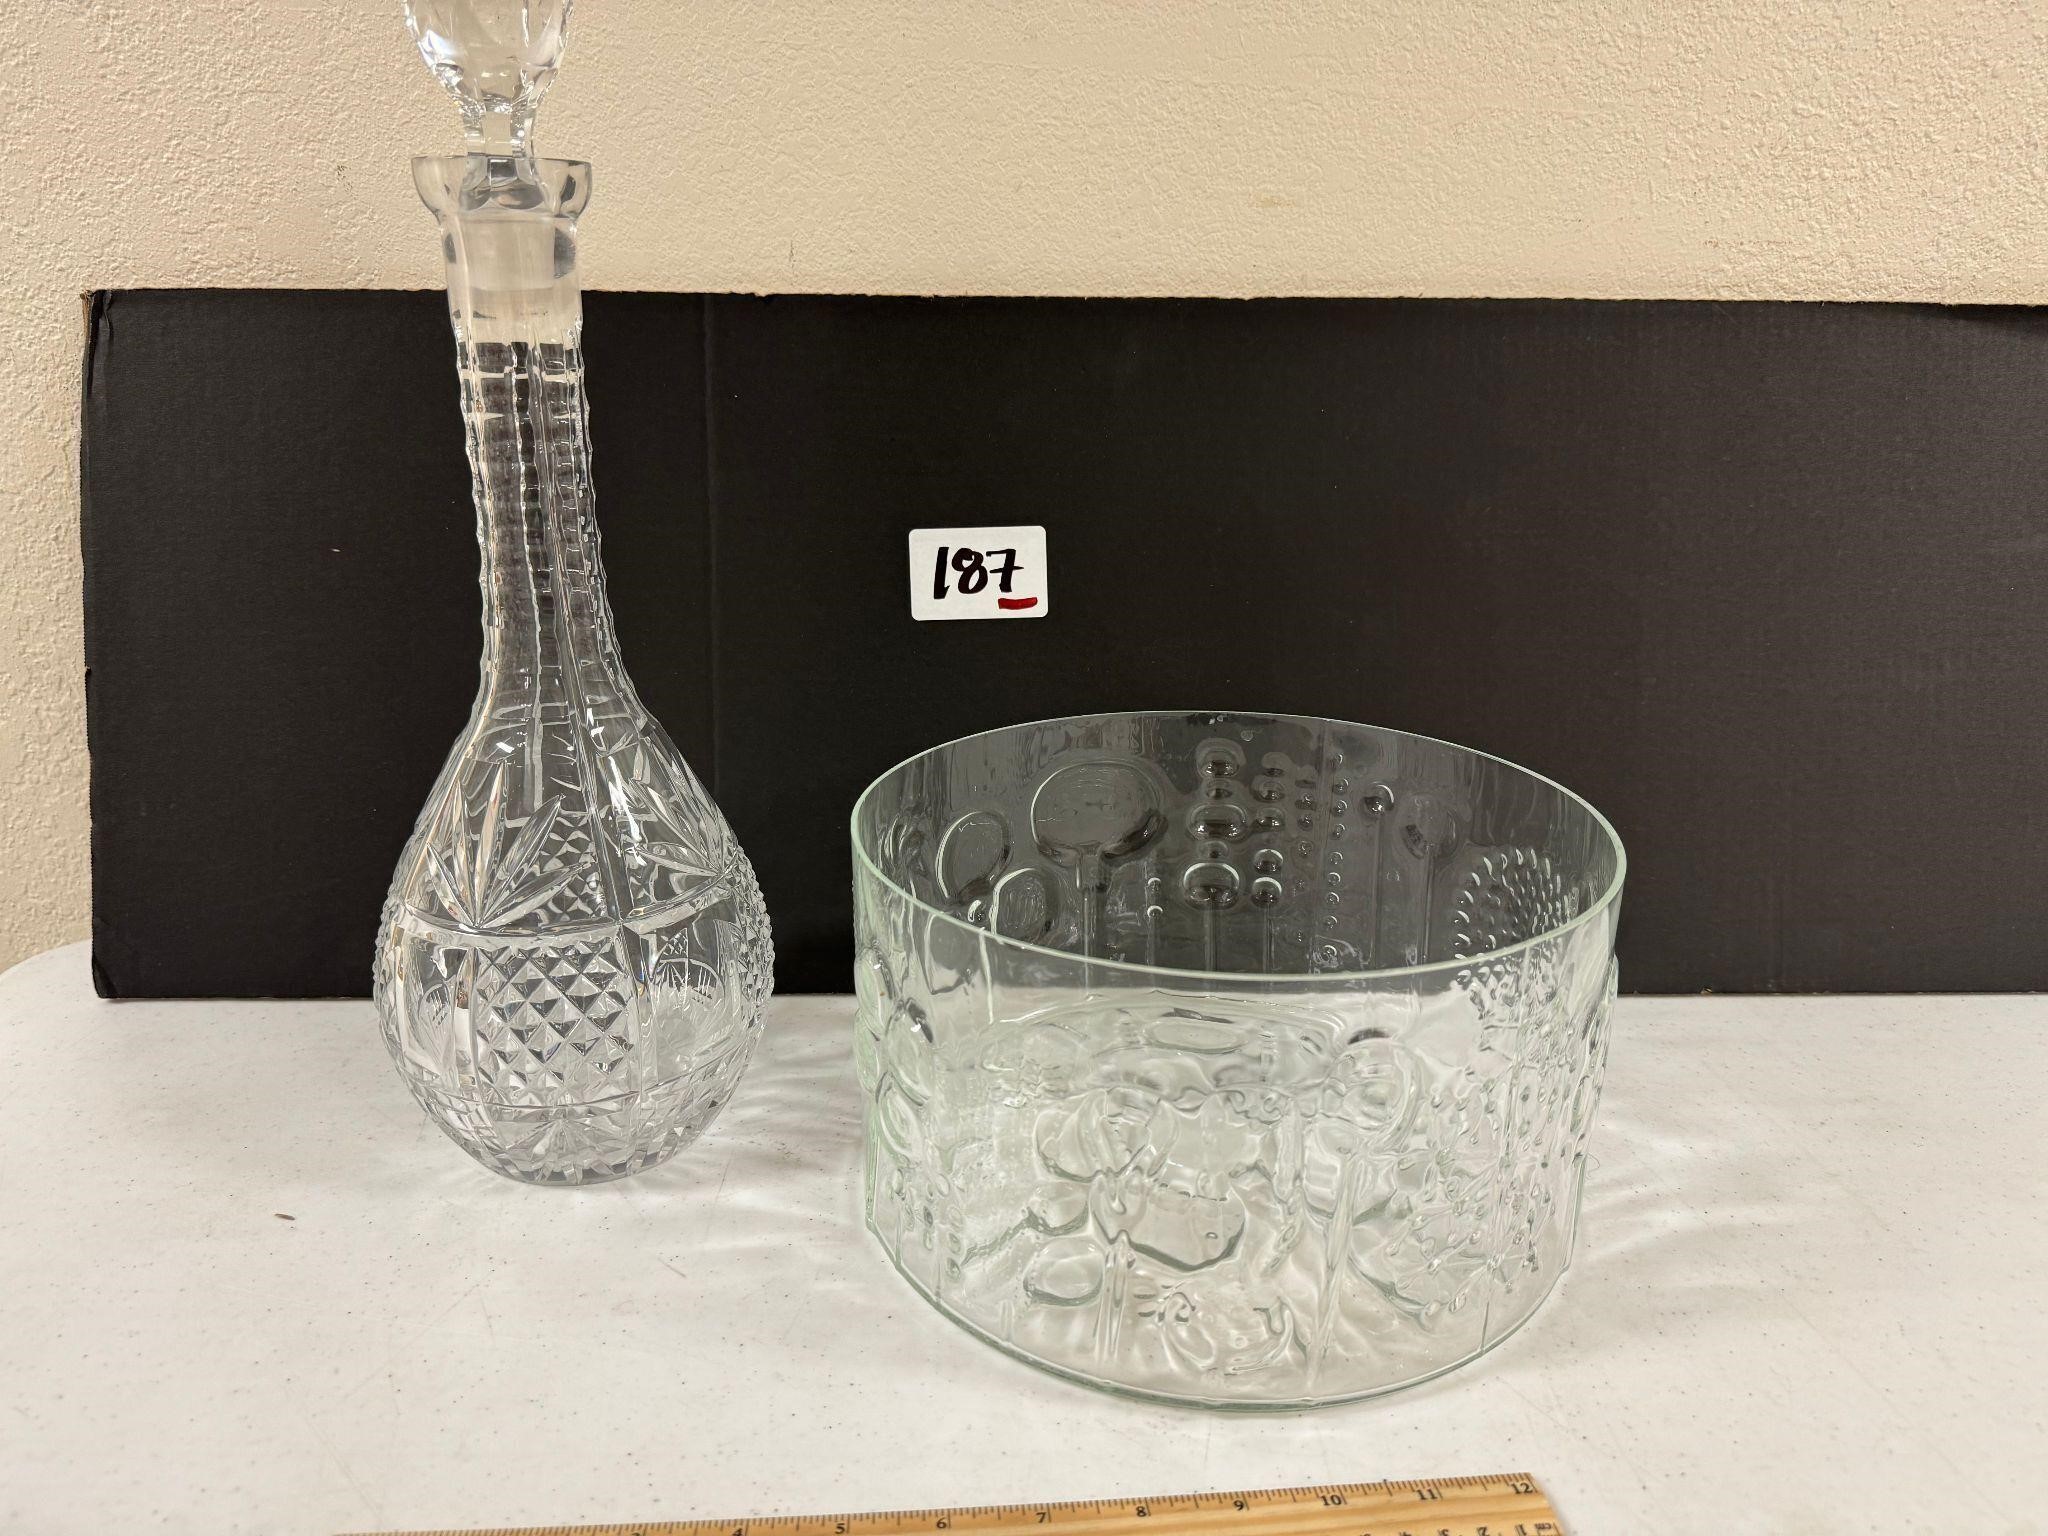 Contemporary Glass Serving Bowl & Crystal Decanter